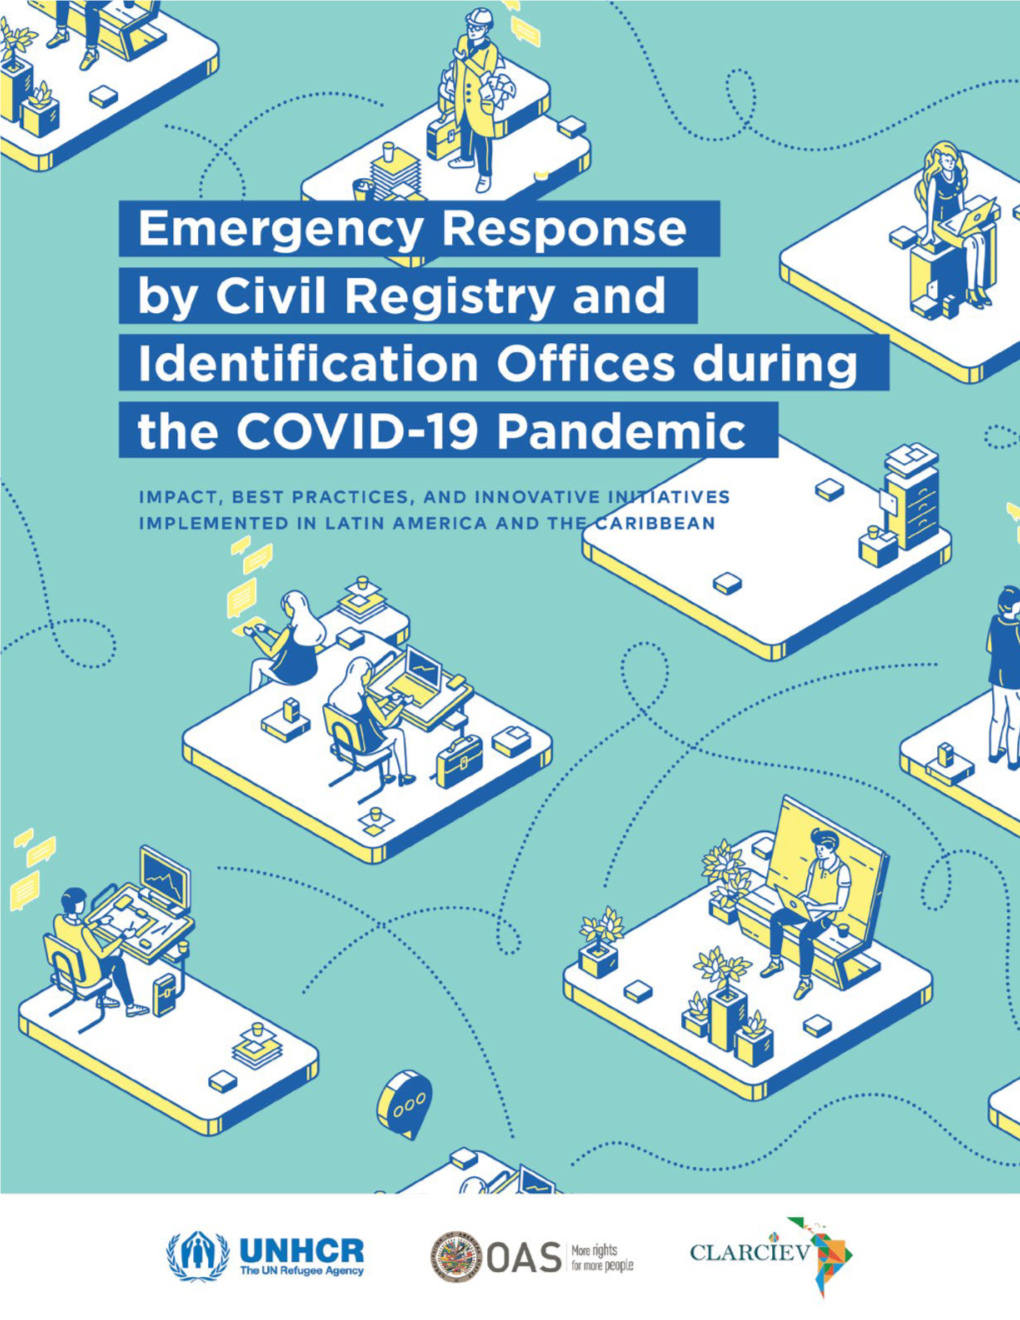 Emergency Response by Civil Registry and Identification Offices During the COVID-19 Pandemic